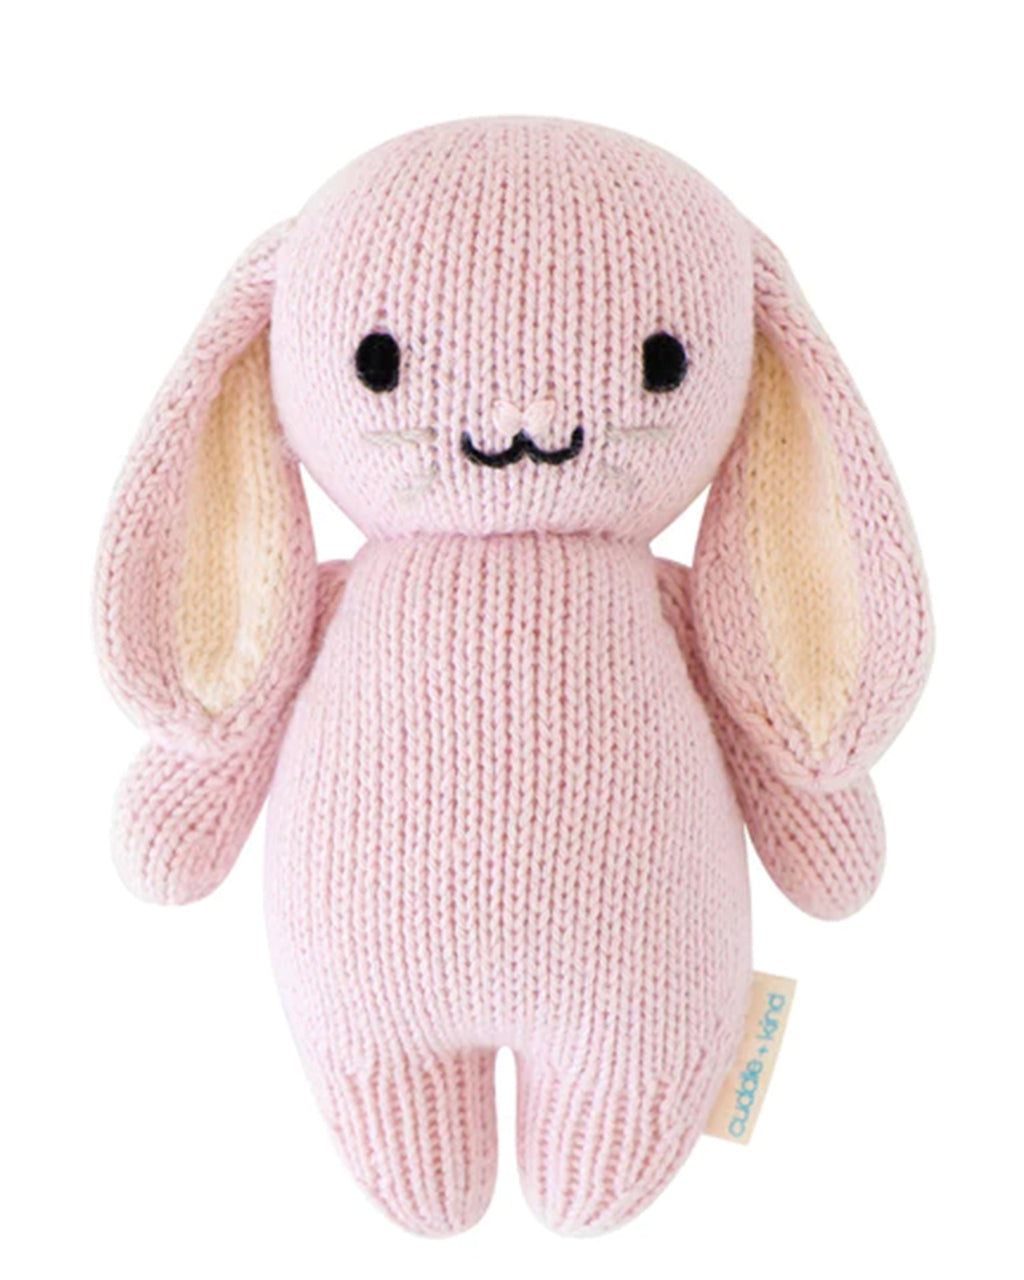 Cuddle + Kind Baby Bunny - Multiple Colors!